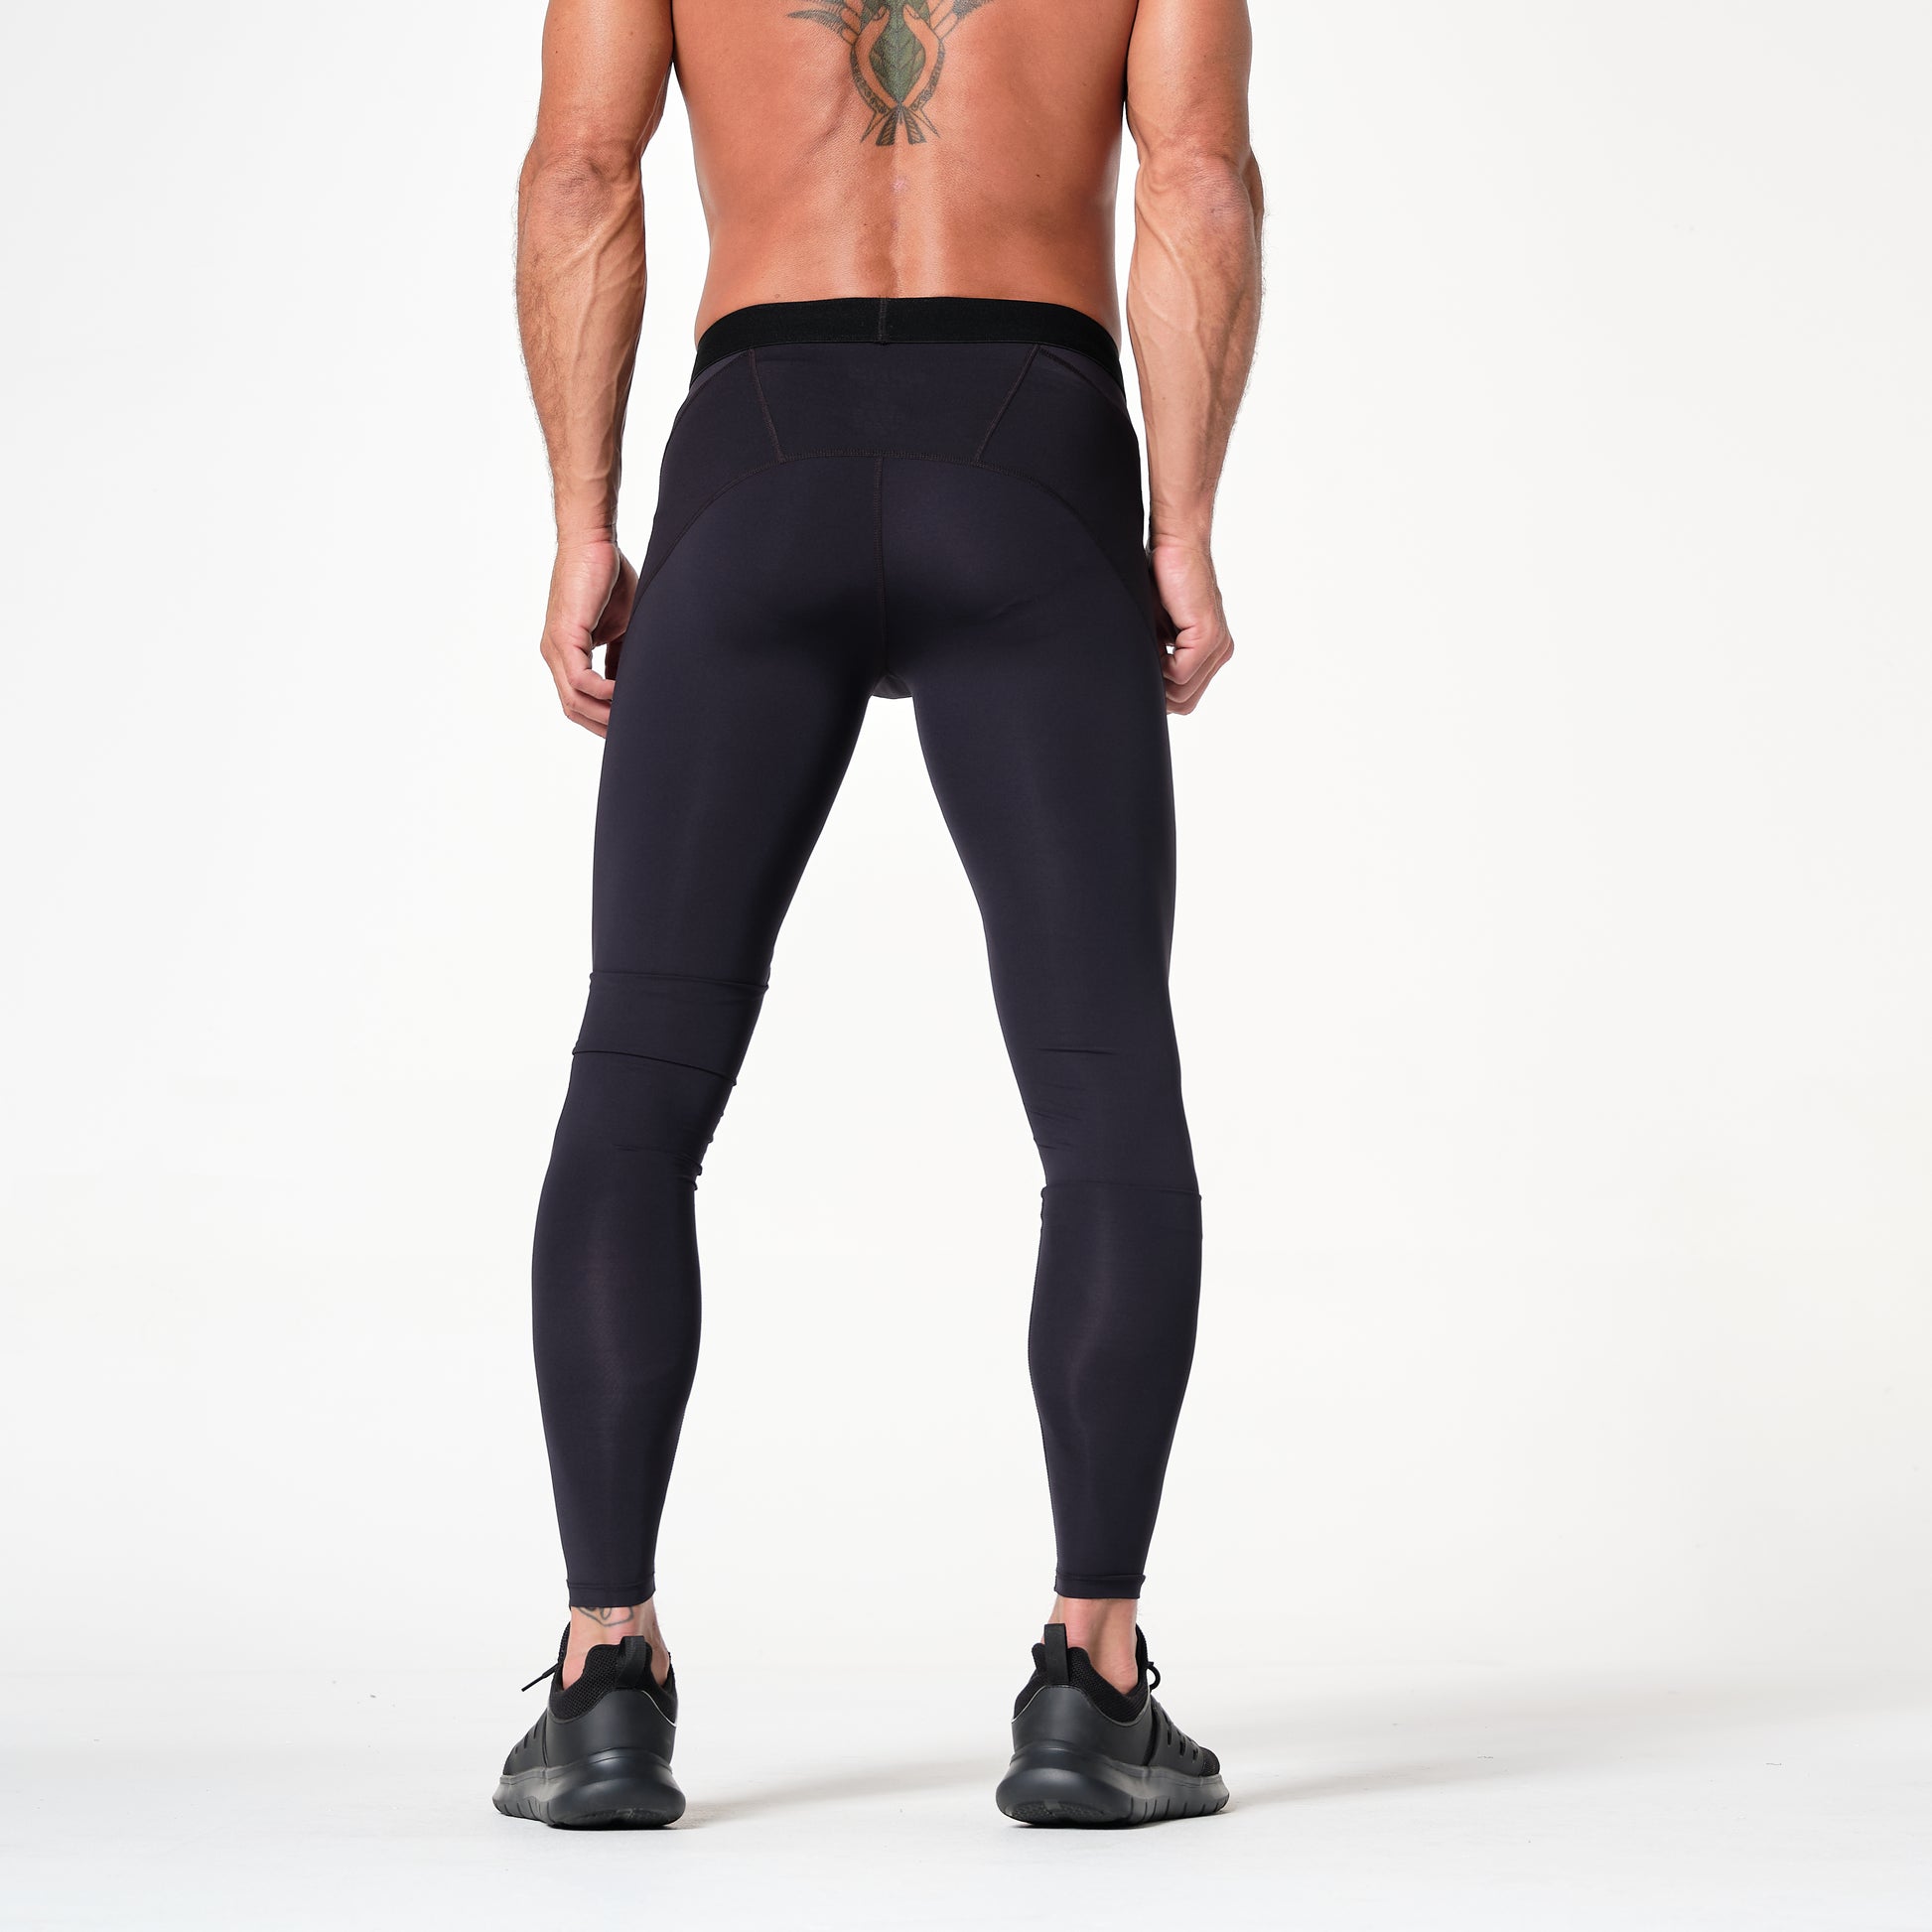 Mens Recovery Compression Tights Leggings, Black Core Support